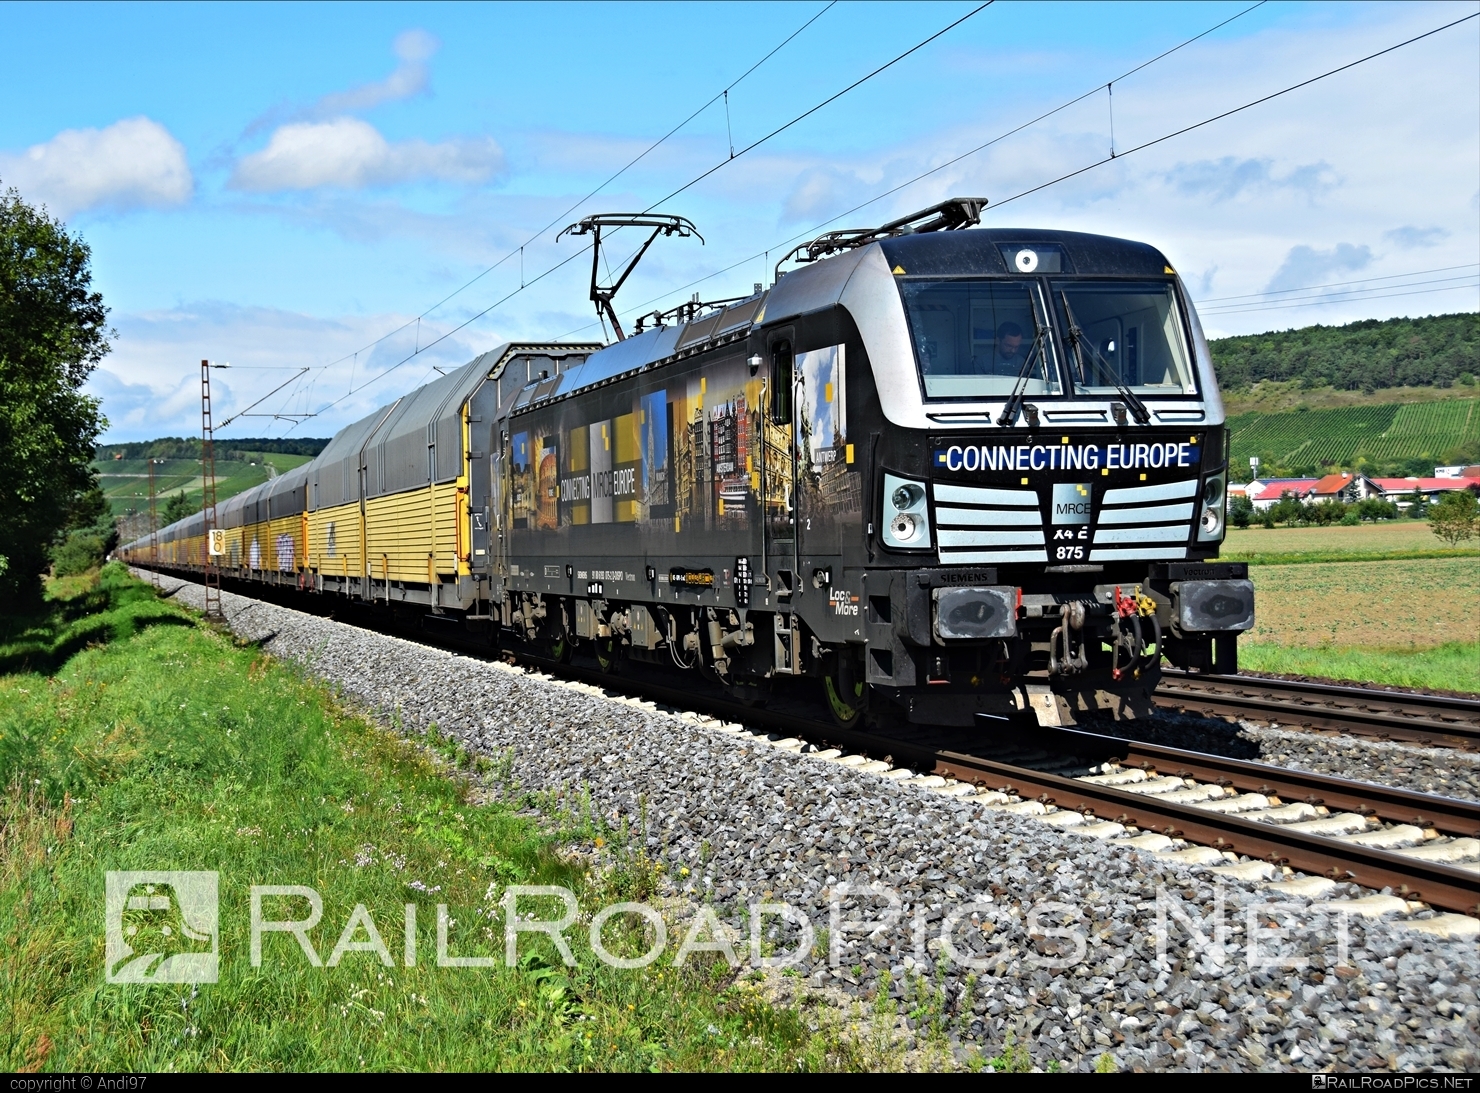 Siemens Vectron AC - 193 875 operated by RTB Cargo GmbH #dispolok #mitsuirailcapitaleurope #mitsuirailcapitaleuropegmbh #mrce #rtb #rtbcargo #siemens #siemensVectron #siemensVectronAC #vectron #vectronAC